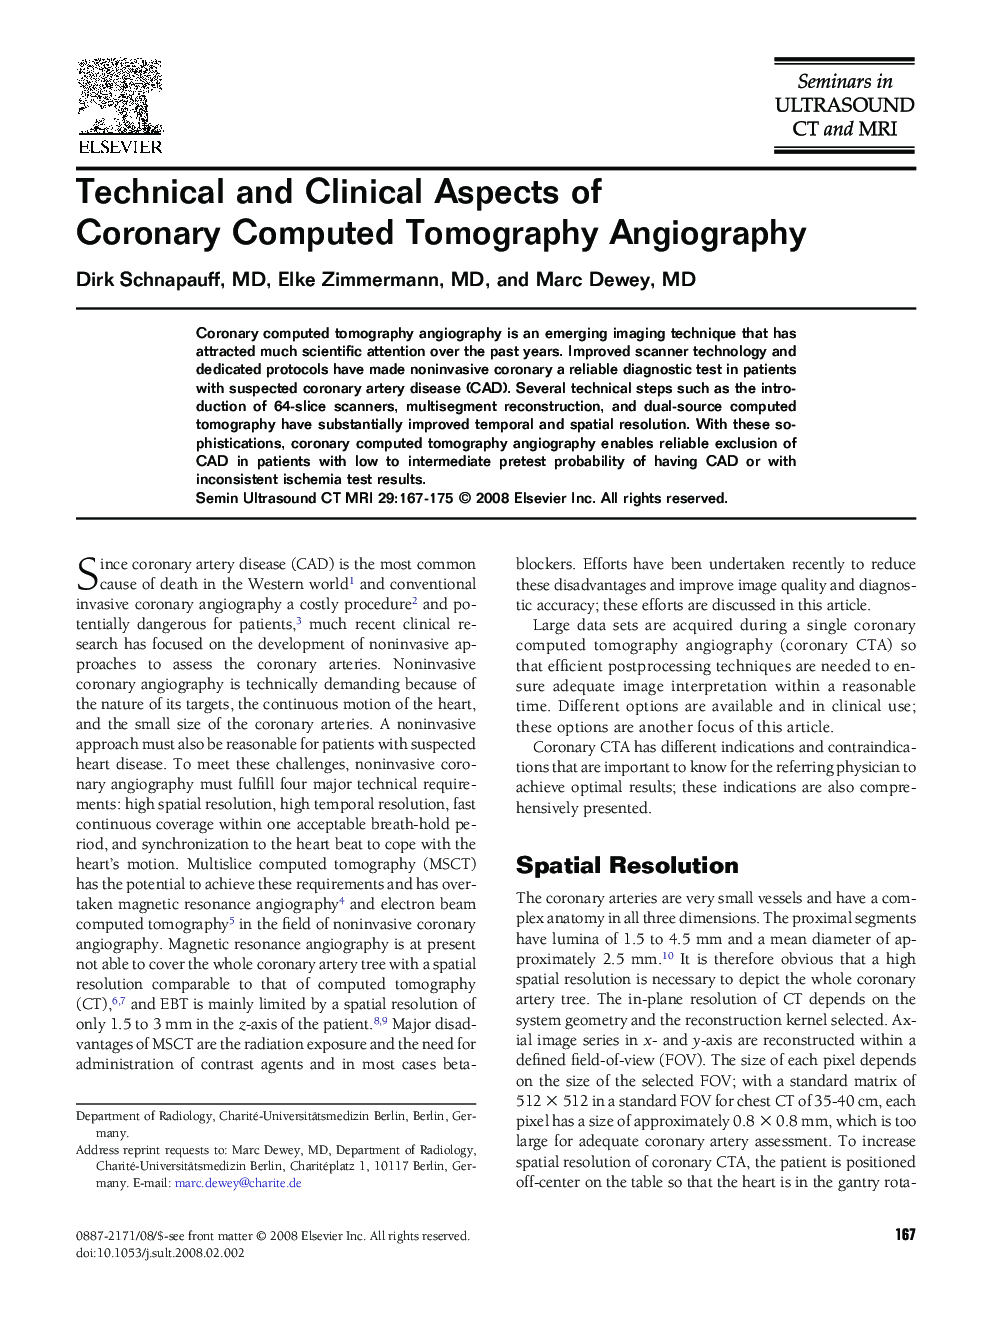 Technical and Clinical Aspects of Coronary Computed Tomography Angiography